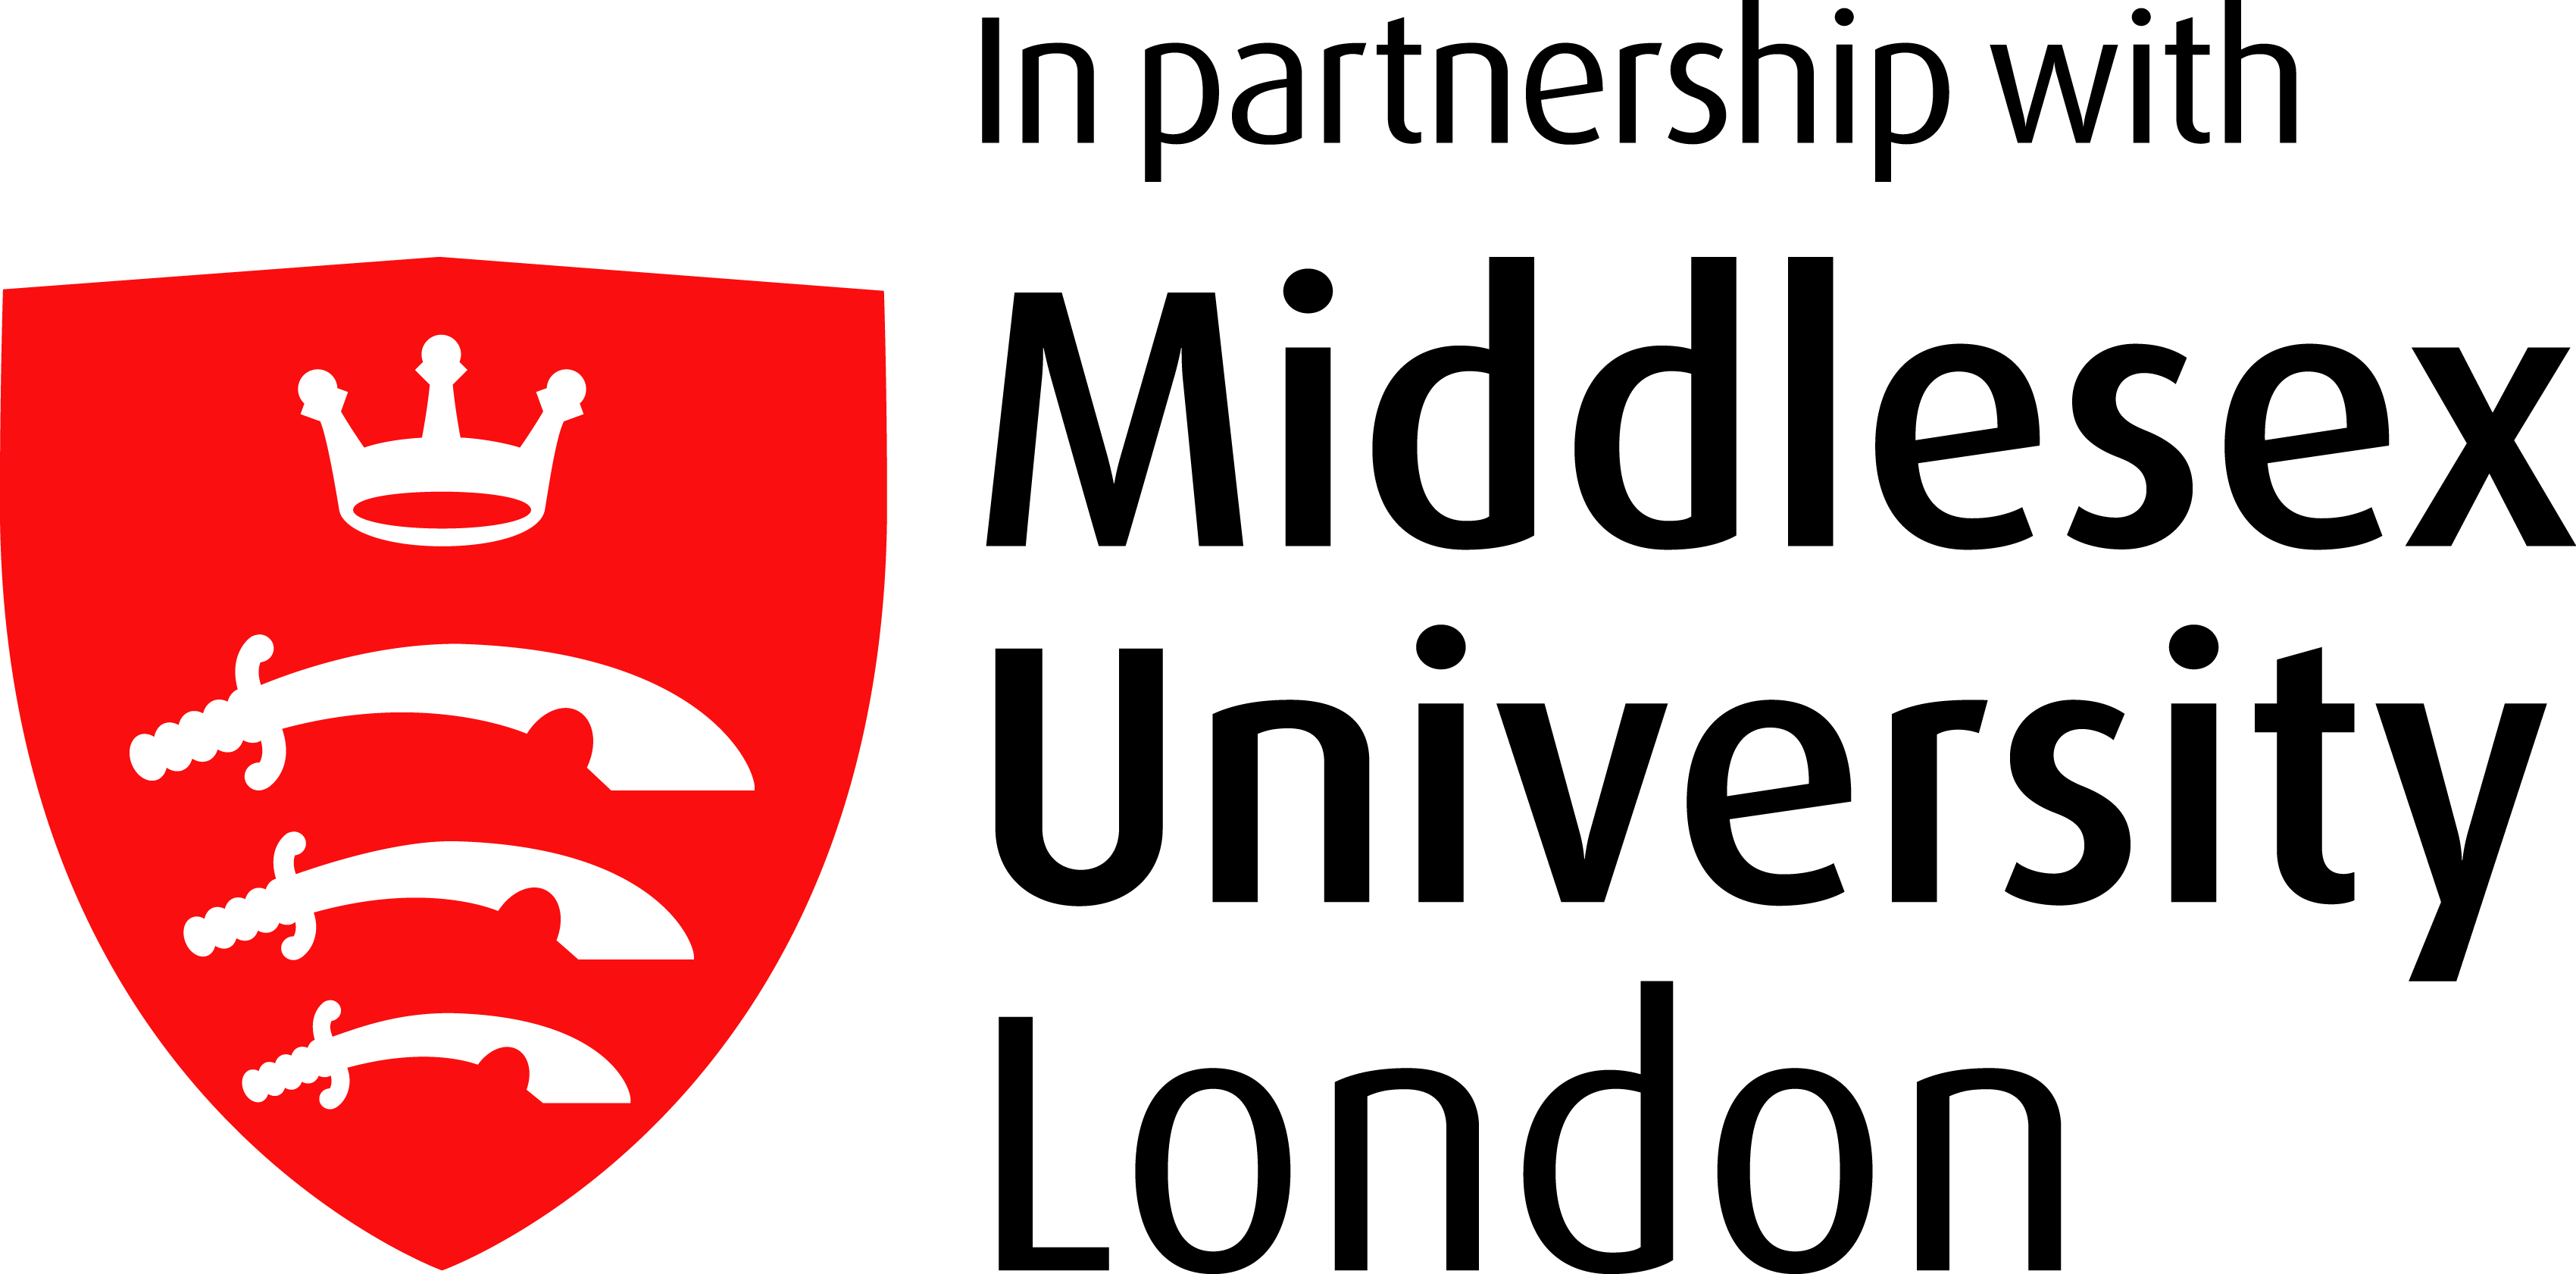 In partnership with Middlesex University